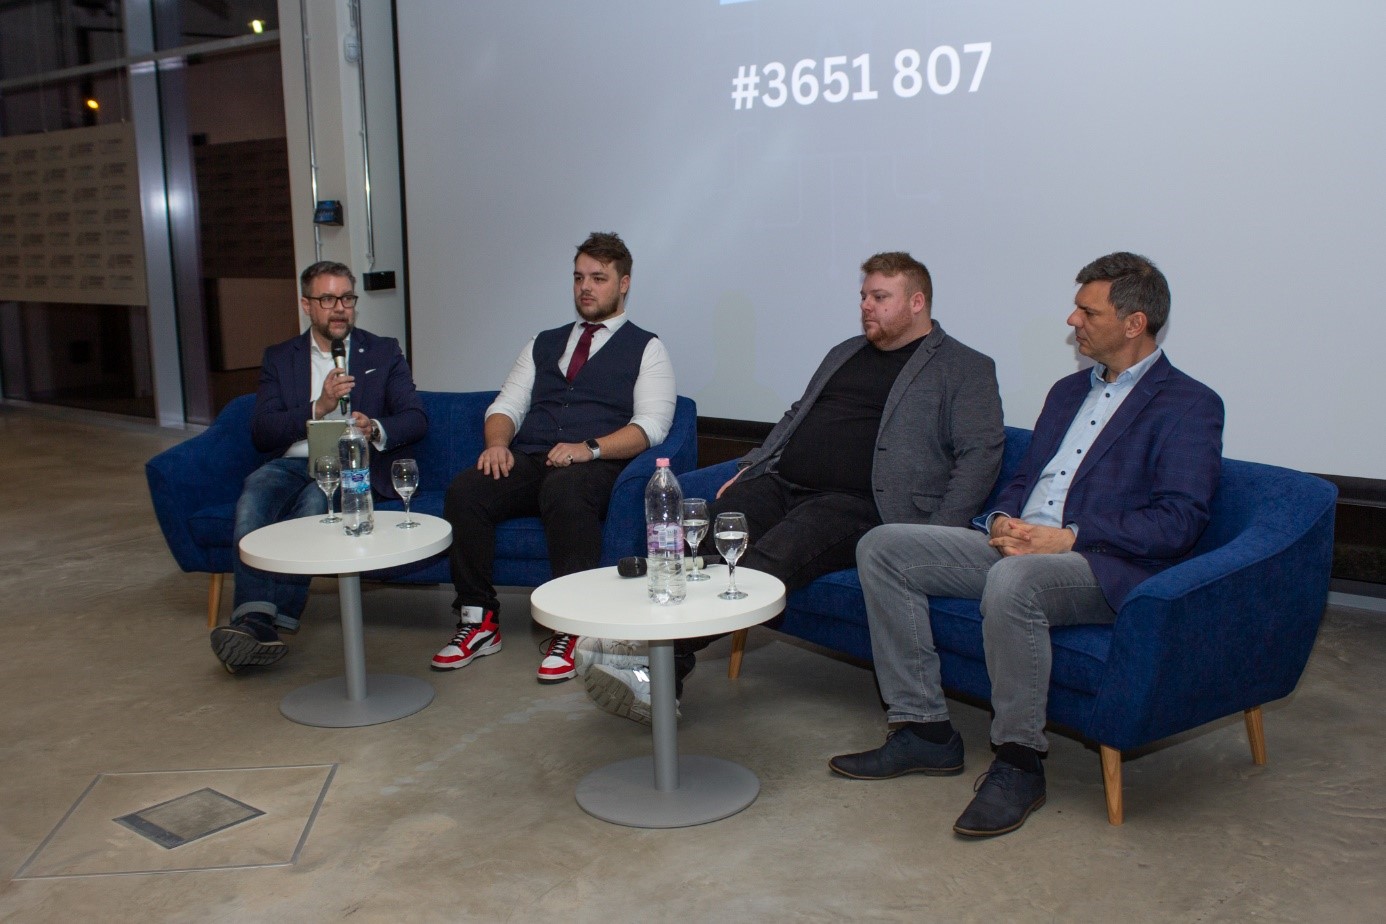 Are AI-driven one-man businesses the future? - an exciting discussion at Széchenyi István University